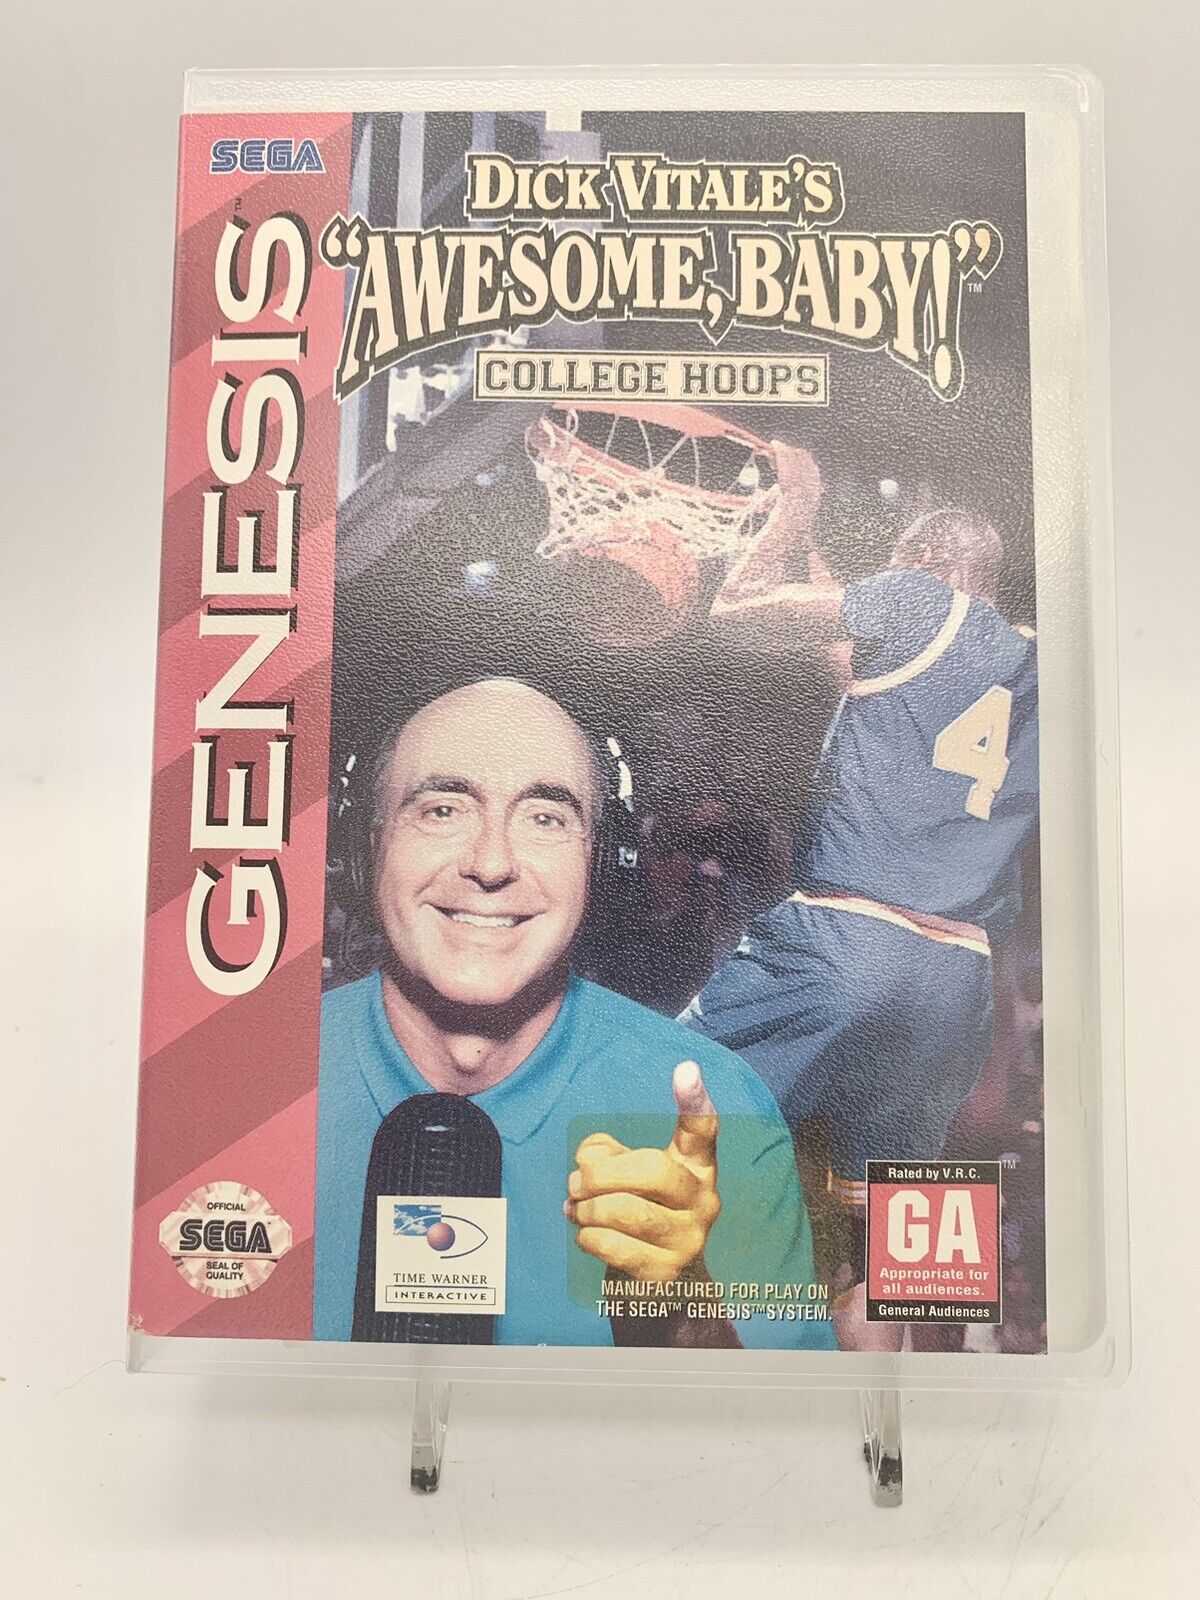 Dick Vitale's "Awesome, Baby!" College Hoops No Manual Sega Genesis Authentic